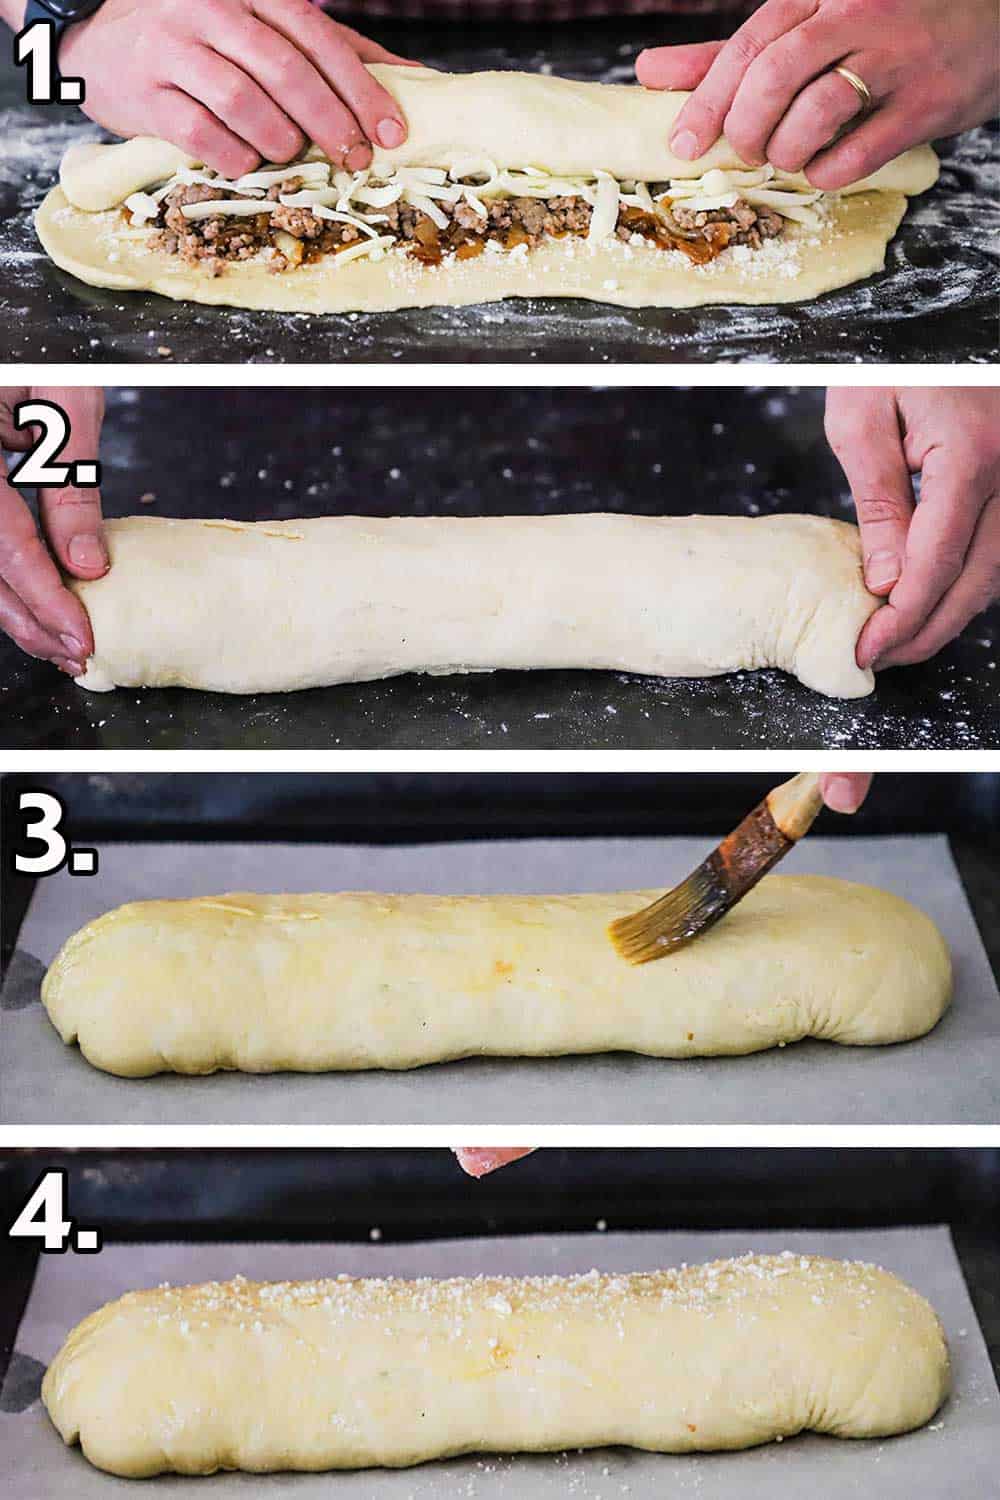 A person rolling up an uncooked stuffed sausage bread and then tucking in the sides, and then brushing an egg wash on top, and then sprinkling grated cheese on top.